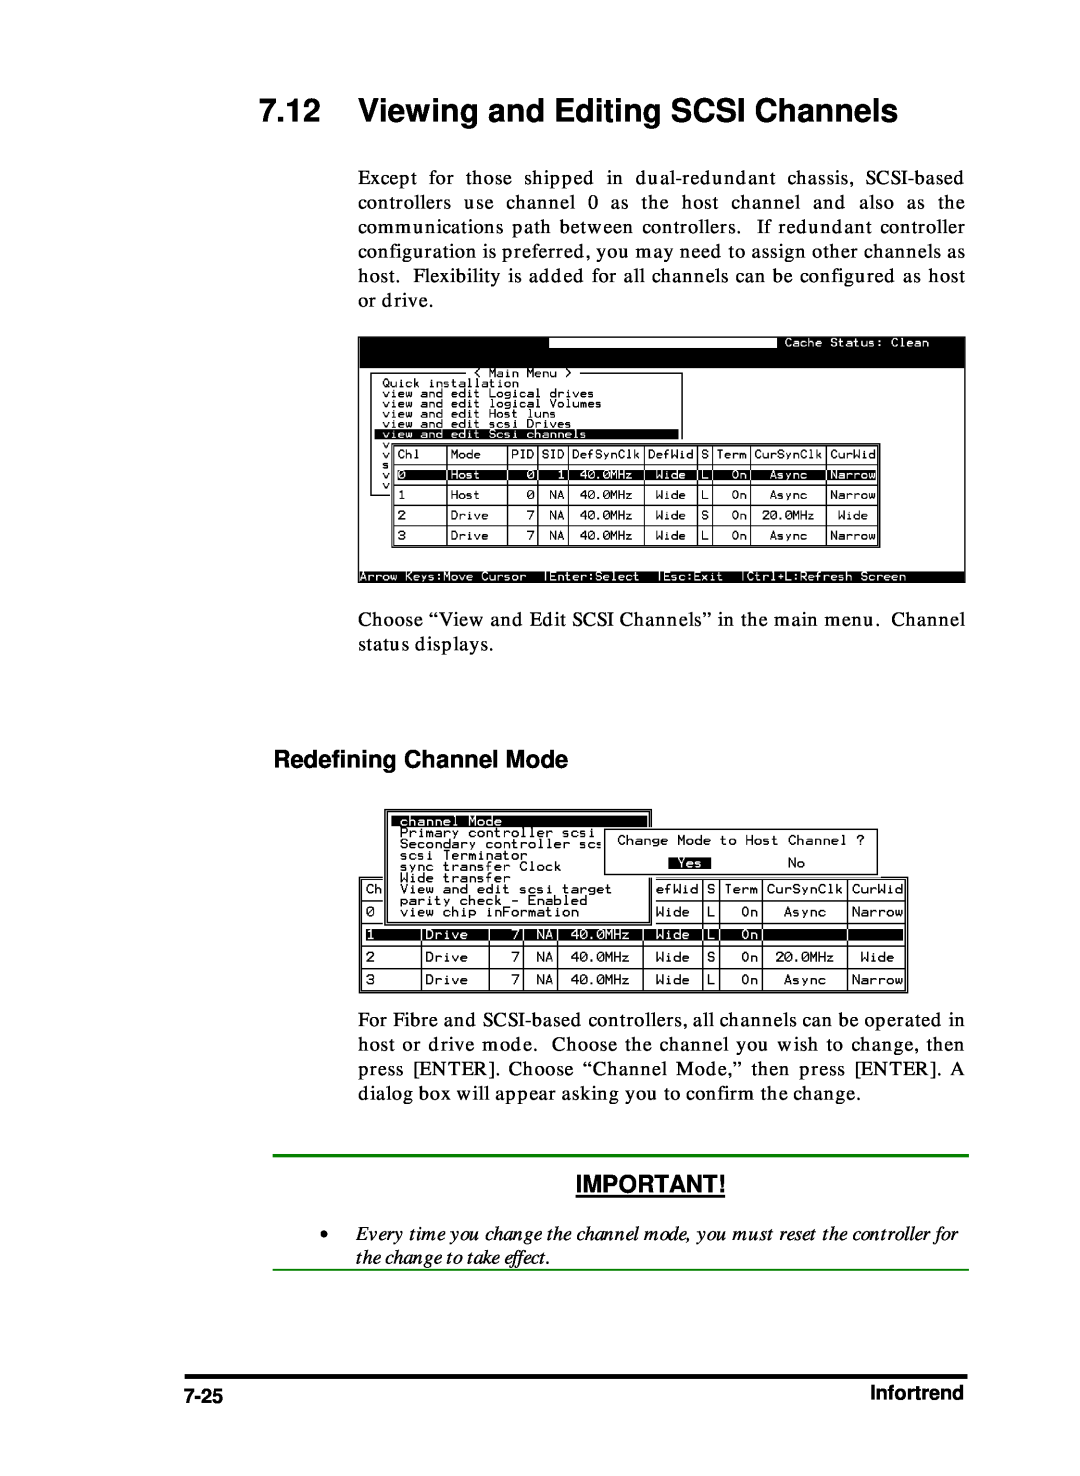 Compaq Infortrend manual Viewing and Editing SCSI Channels, Redefining Channel Mode 